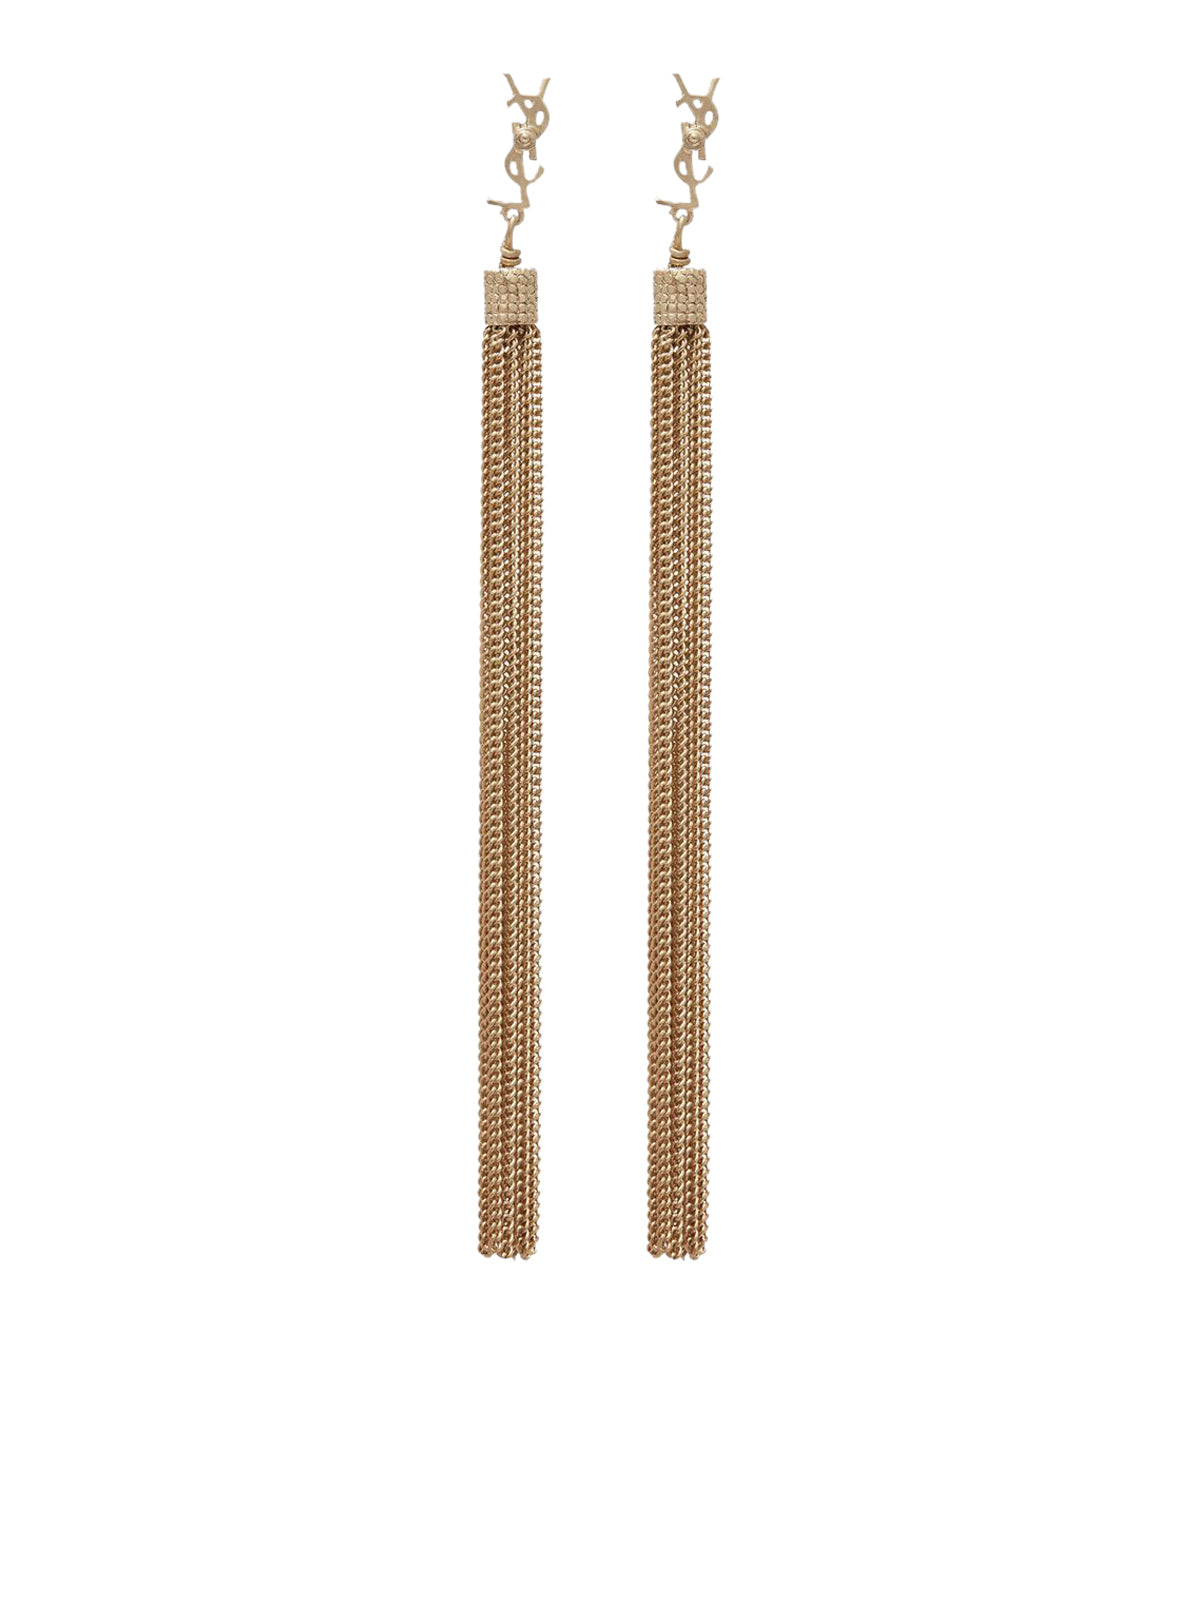 LOULOU EARRINGS WITH CHAIN TASSELS IN LIGHT GOLD BRASS